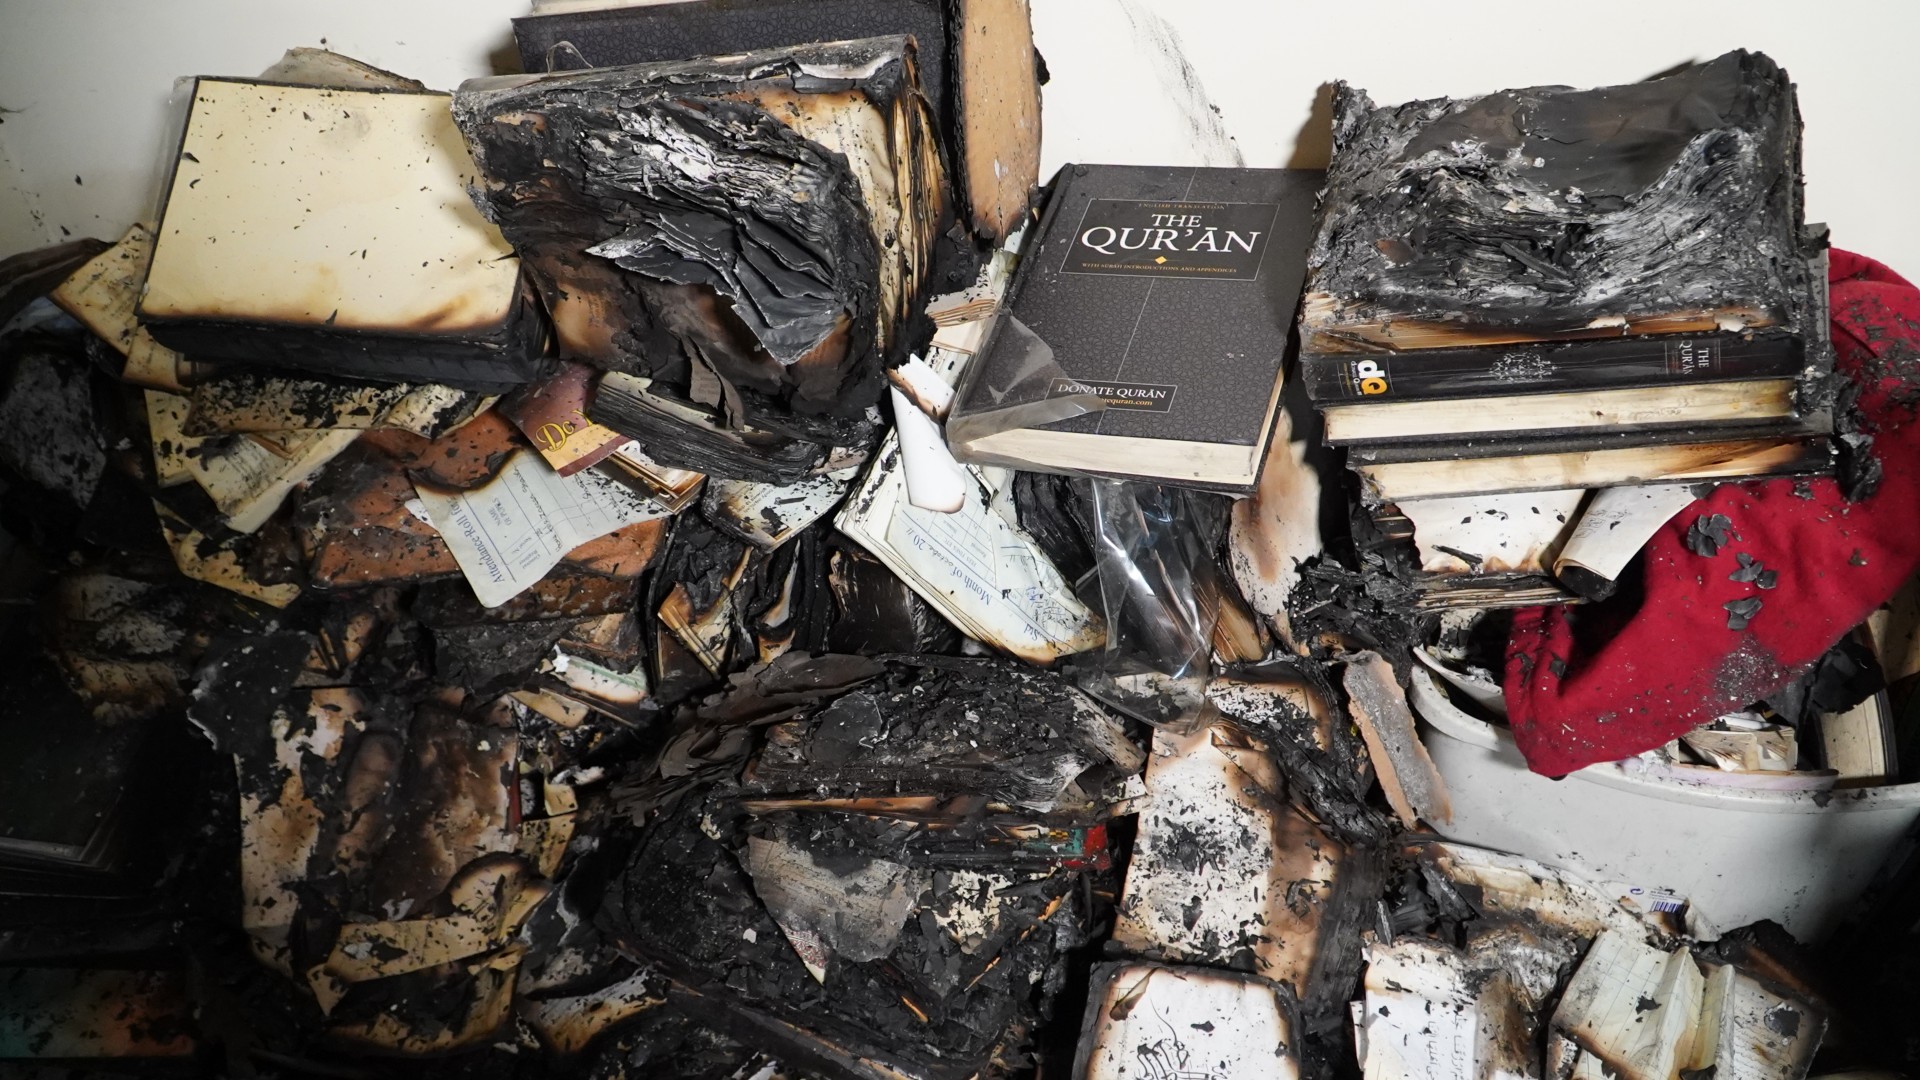 The Muslim community in West London is in a state of shock after the centre was broken into and Quran's set ablaze (MEE/Khaled Shalaby)